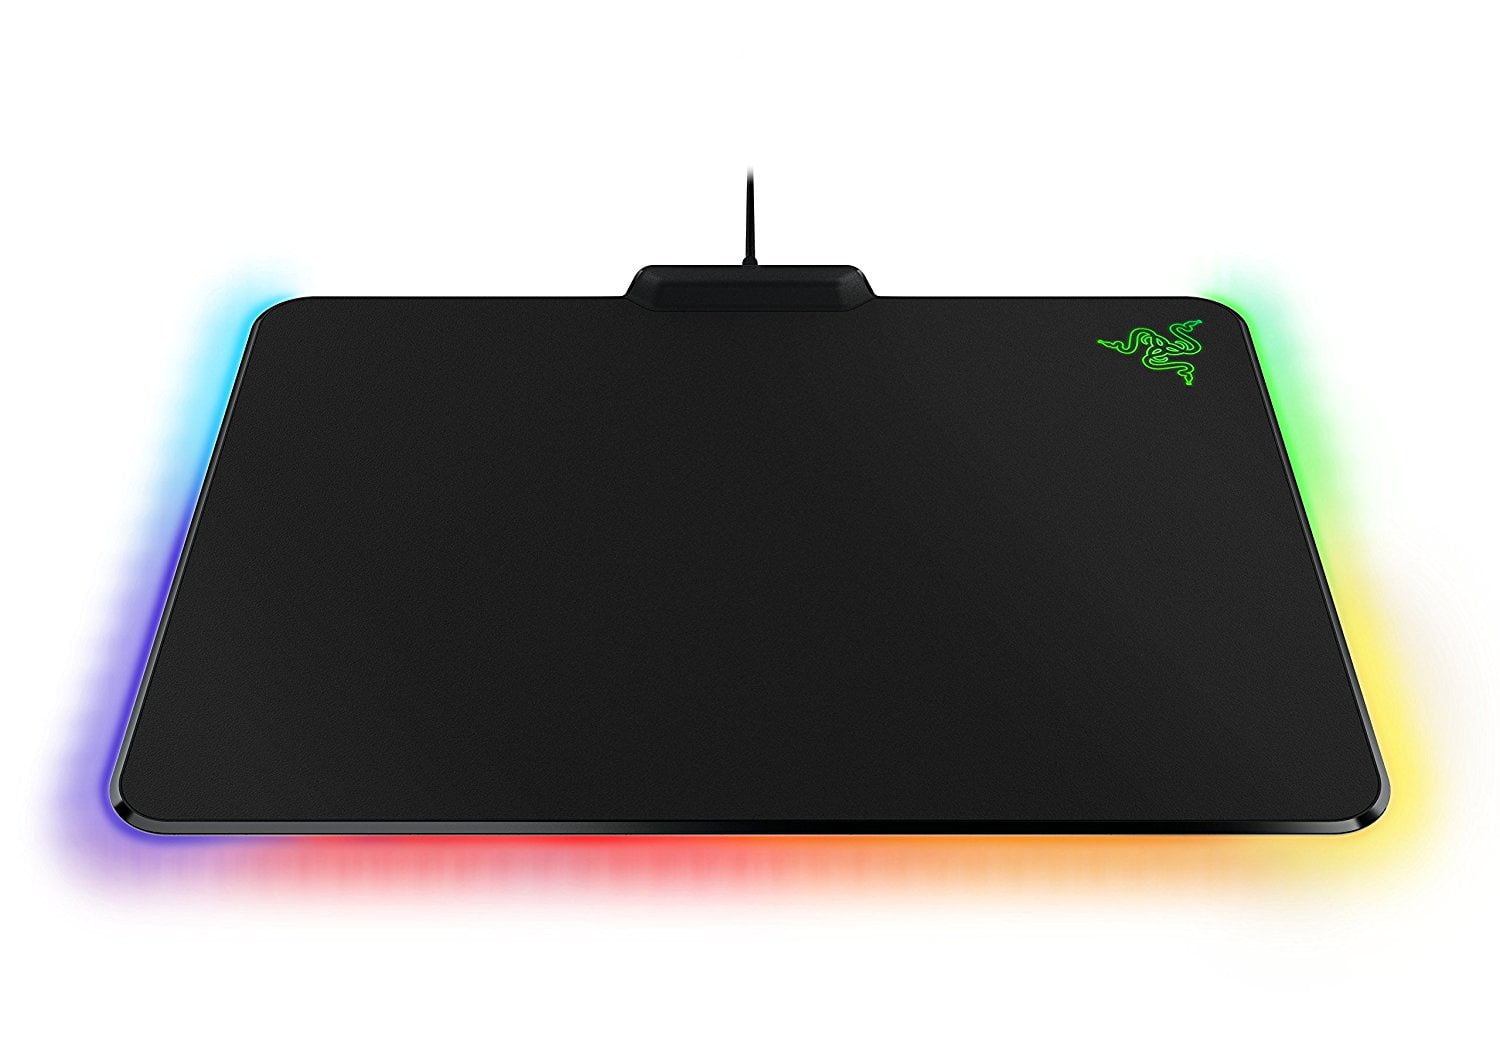 Razer Firefly Hard Gaming Mouse Pad: Chroma RGB Lighting - 14"x10" - Ideal for Quicker Mouse Movements Non-Slip Rubber Base - Walmart.com